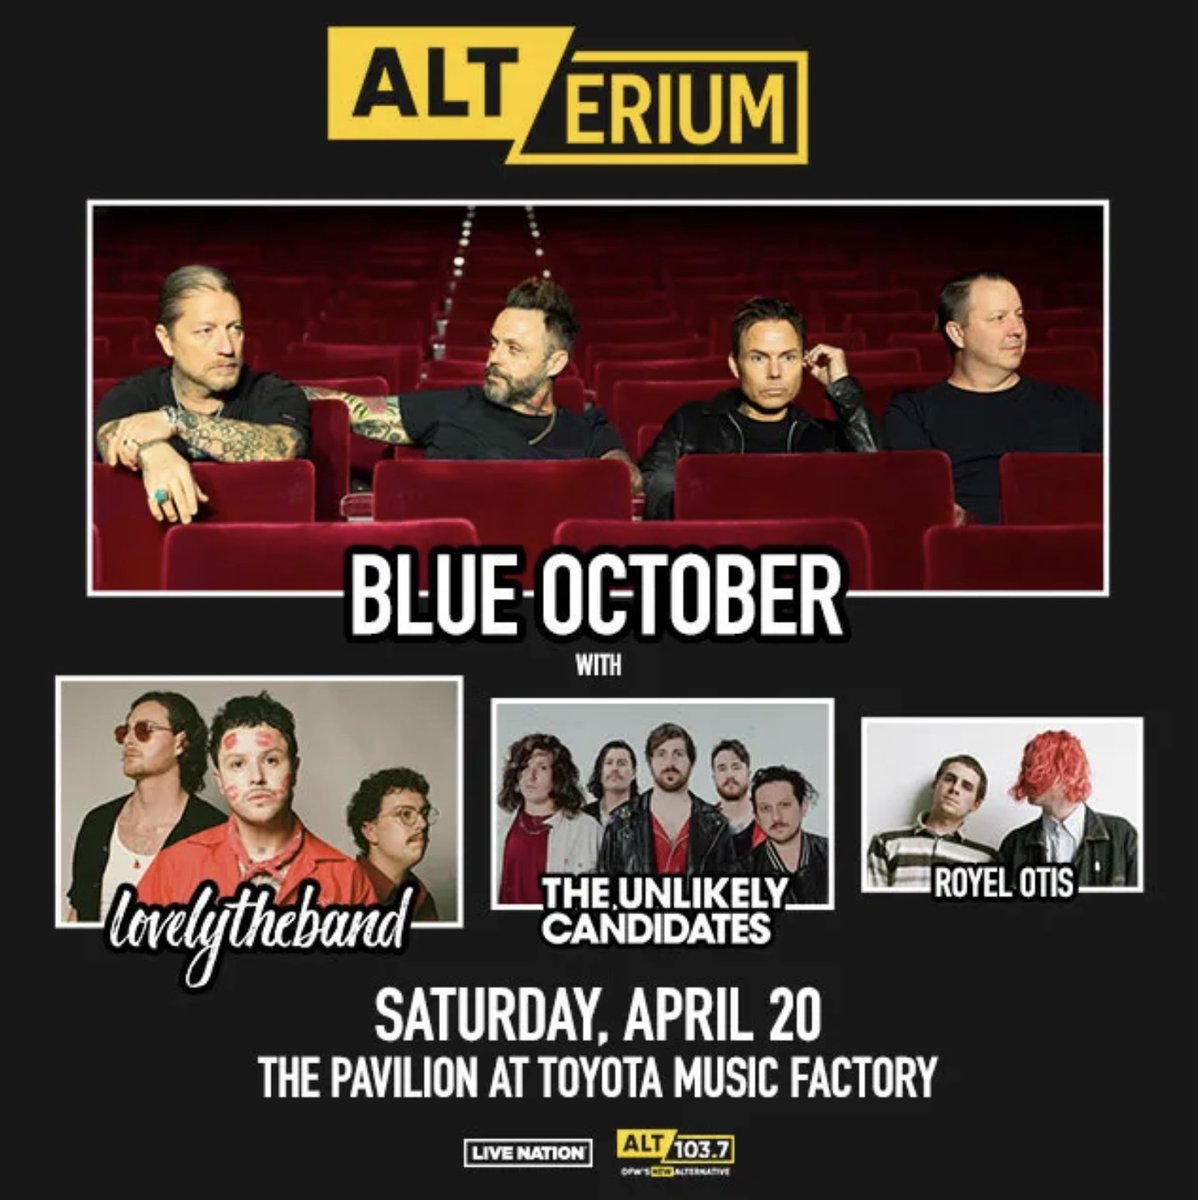 It's almost here! The return of #ALTERIUM feat. @Blueoctoberband, @lovelytheband, @RoyelOtis & @tucband is coming up this Saturday at @ThePavilionTMF. Get tix here: livemu.sc/3tpIZXV